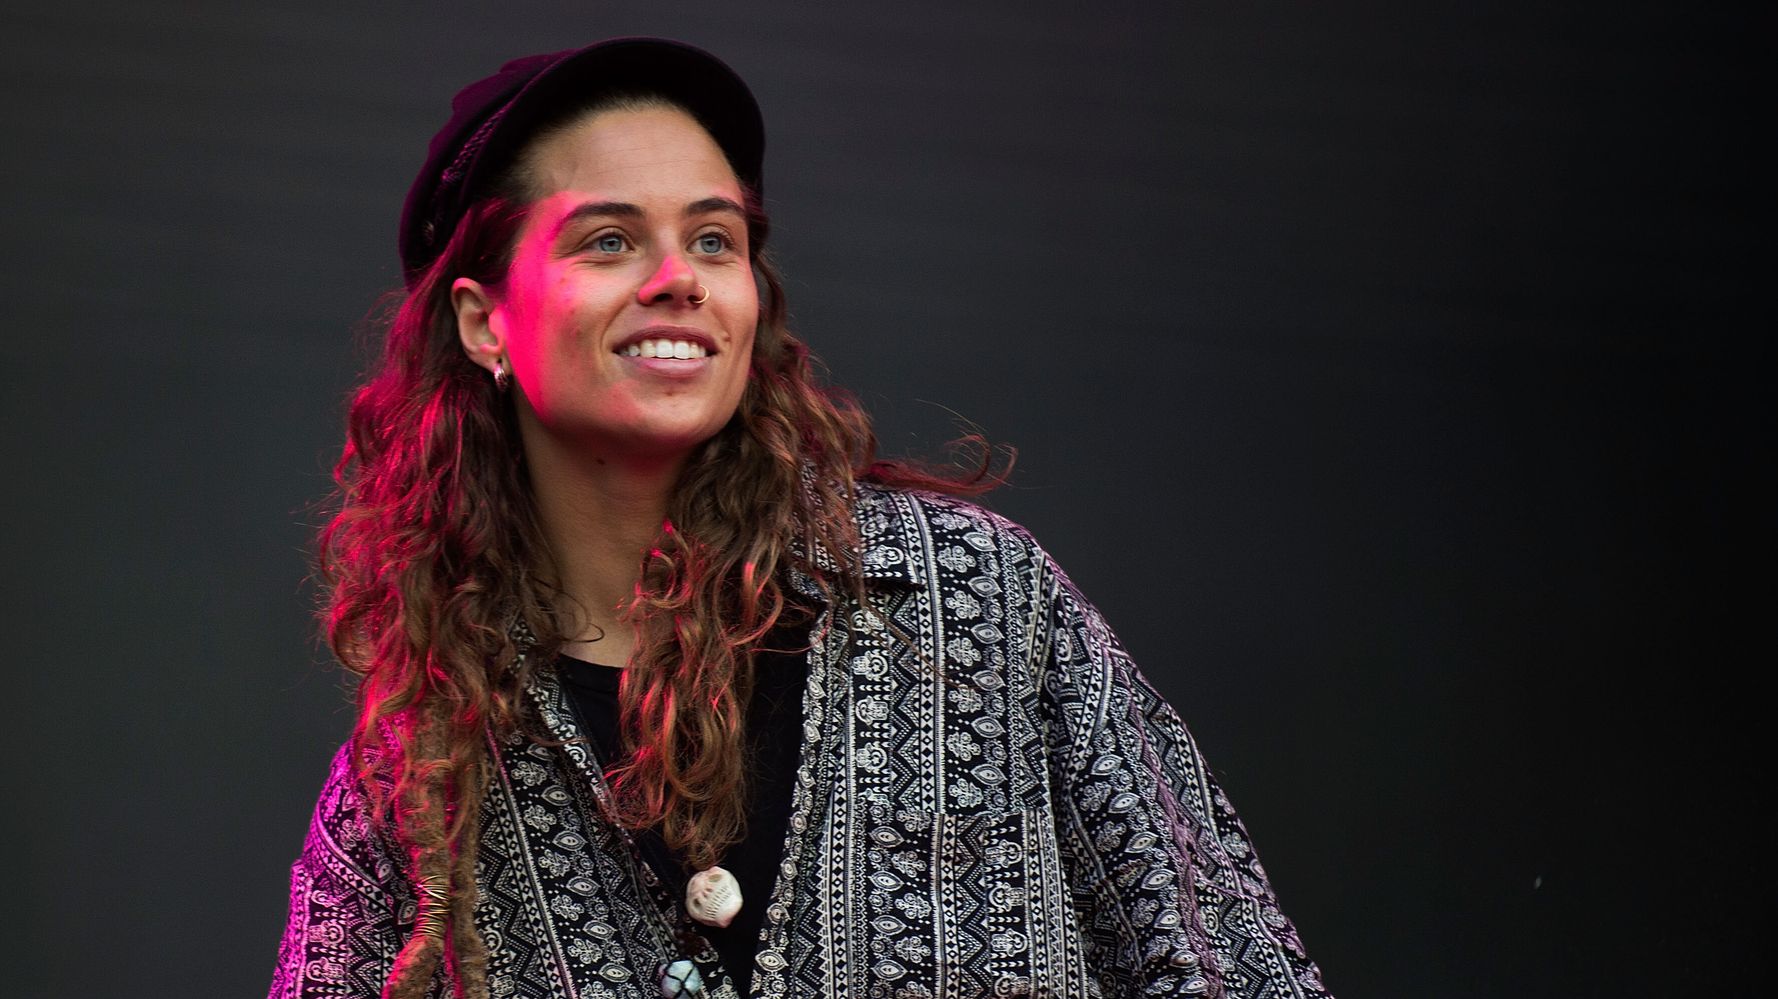 Tash Sultana Opens Her Heart On Mental Illness In Beautifully Candid Messag...